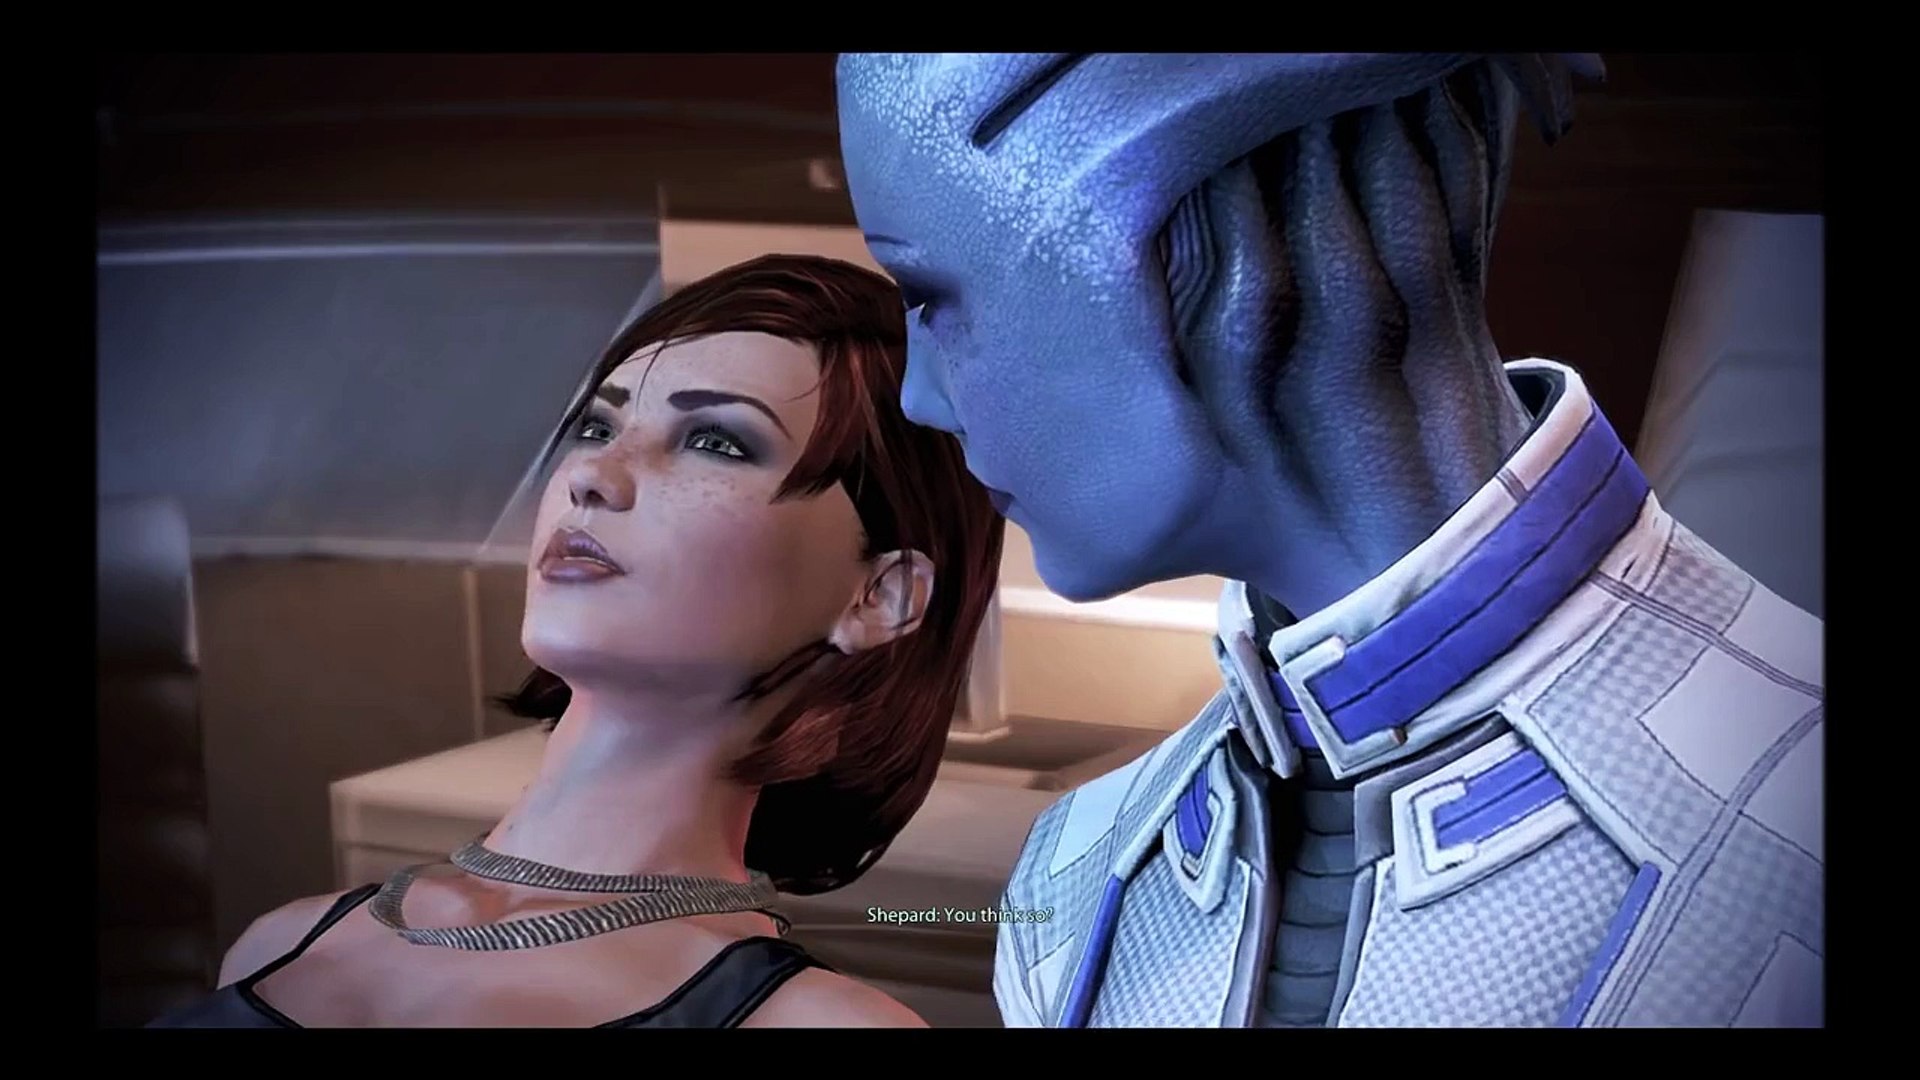 arri arlen recommends liara and femshep pic